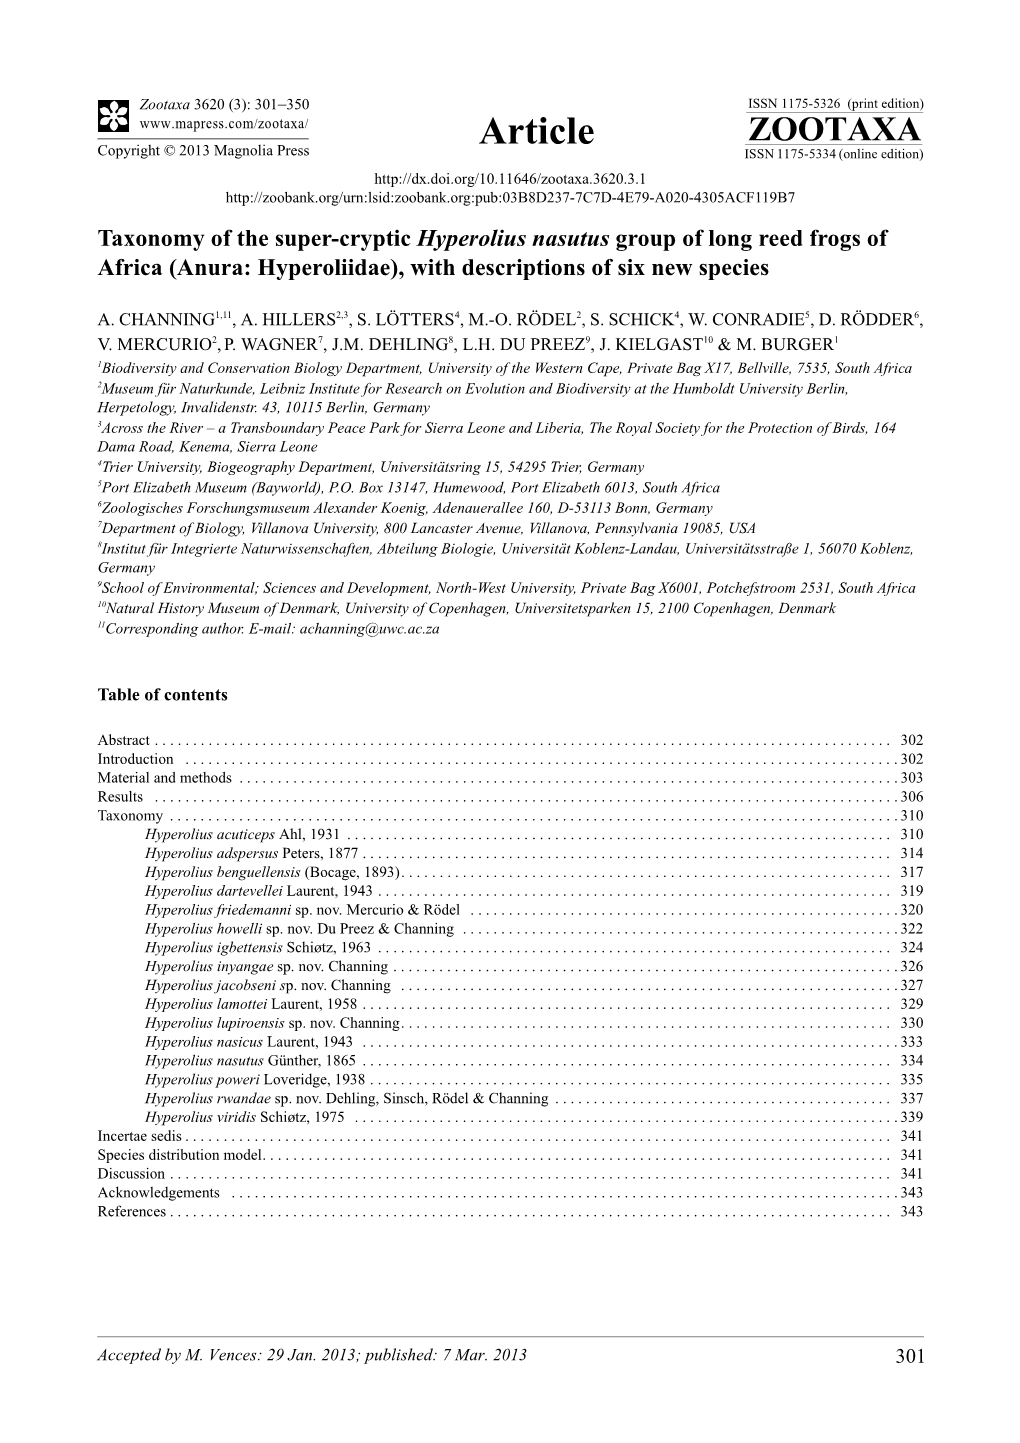 Taxonomy of the Super-Cryptic Hyperolius Nasutus Group of Long Reed Frogs of Africa (Anura: Hyperoliidae), with Descriptions of Six New Species